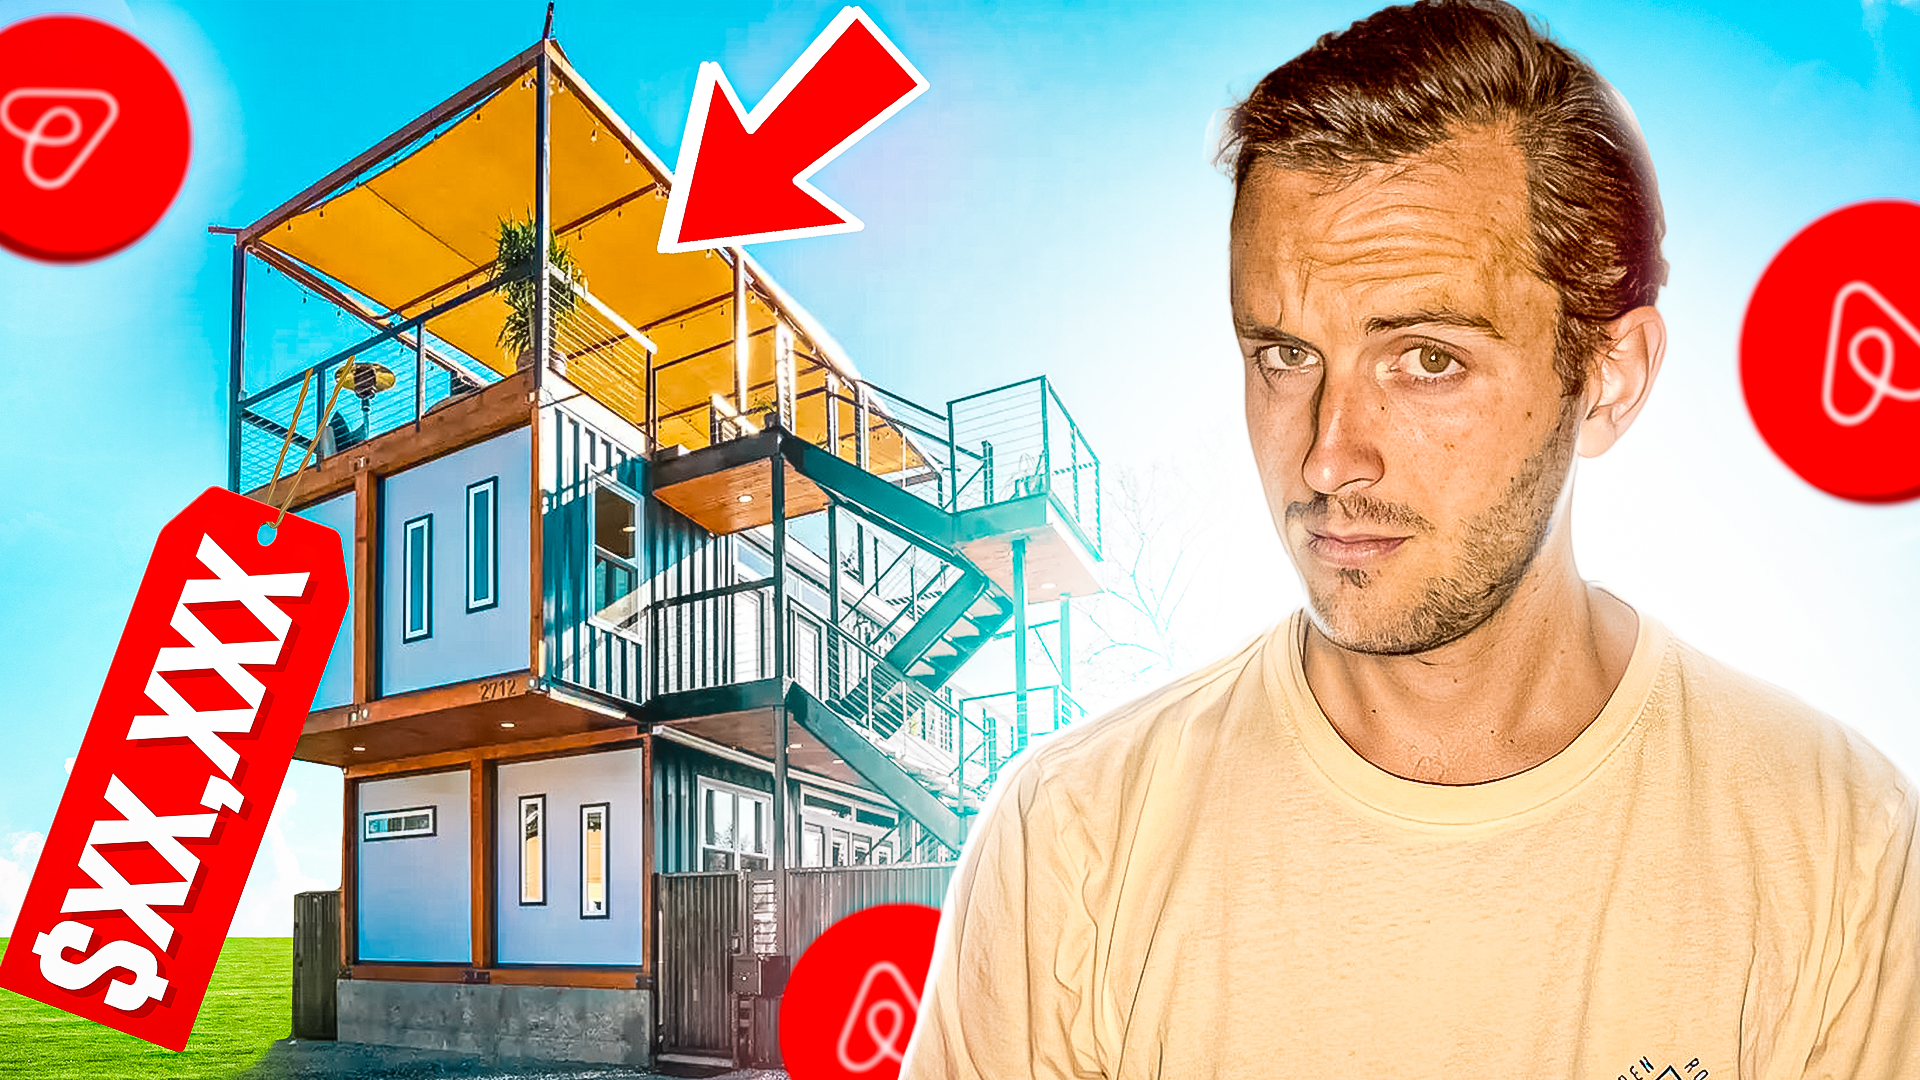 How much can shipping containers make on Airbnb?